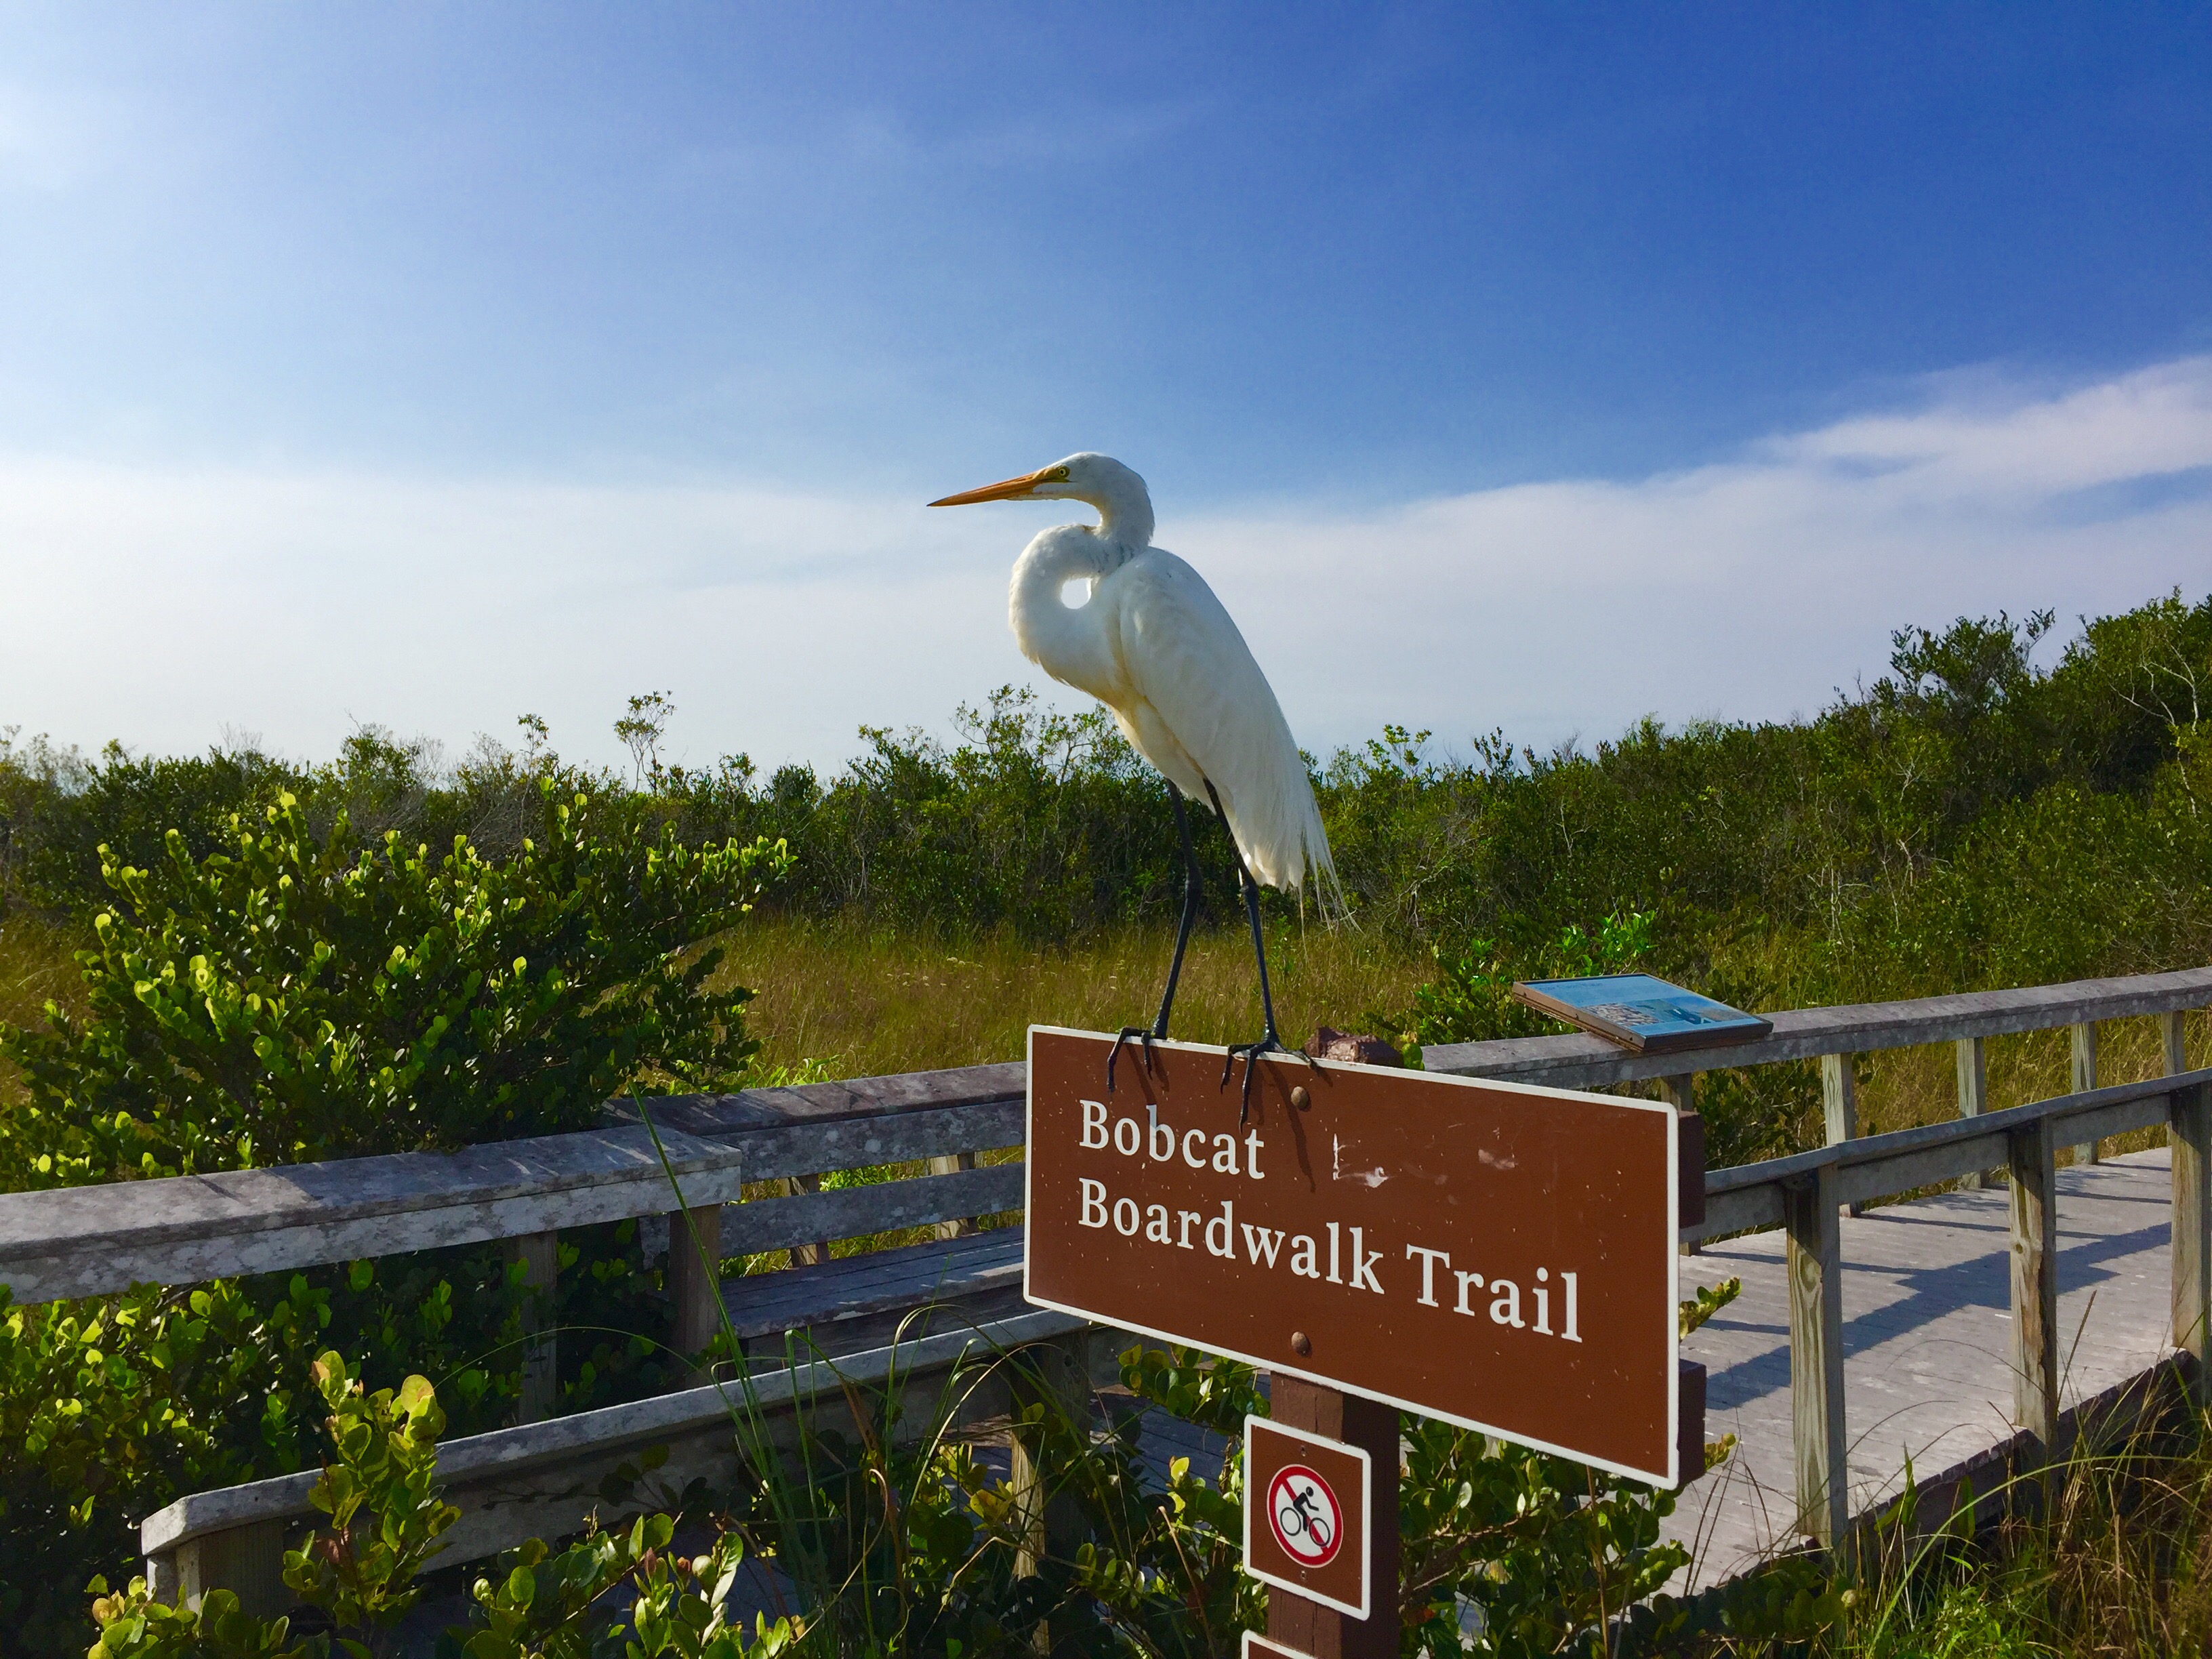 A Great Egret stands on top of the Bobcat Boardwalk Trail